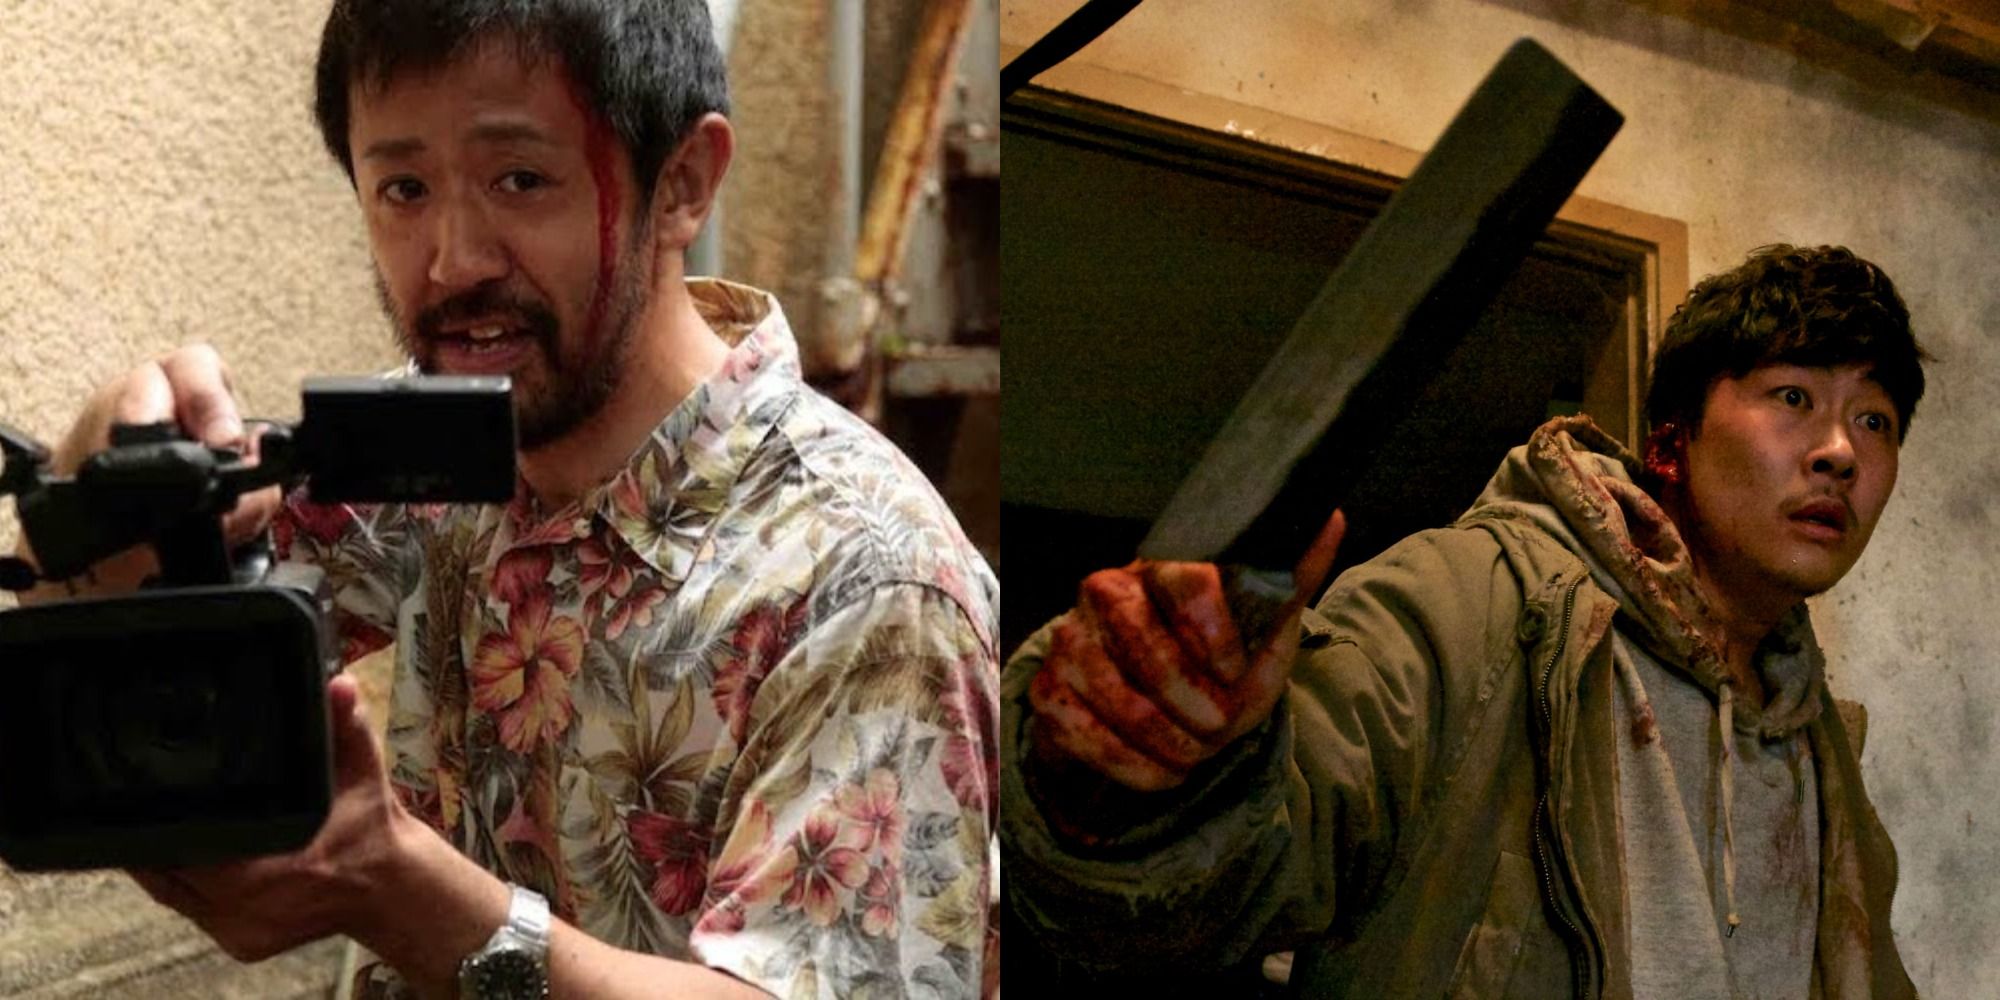 Split image showing scenes from the movies One Cut of the Dead and A Record of Sweet Murder